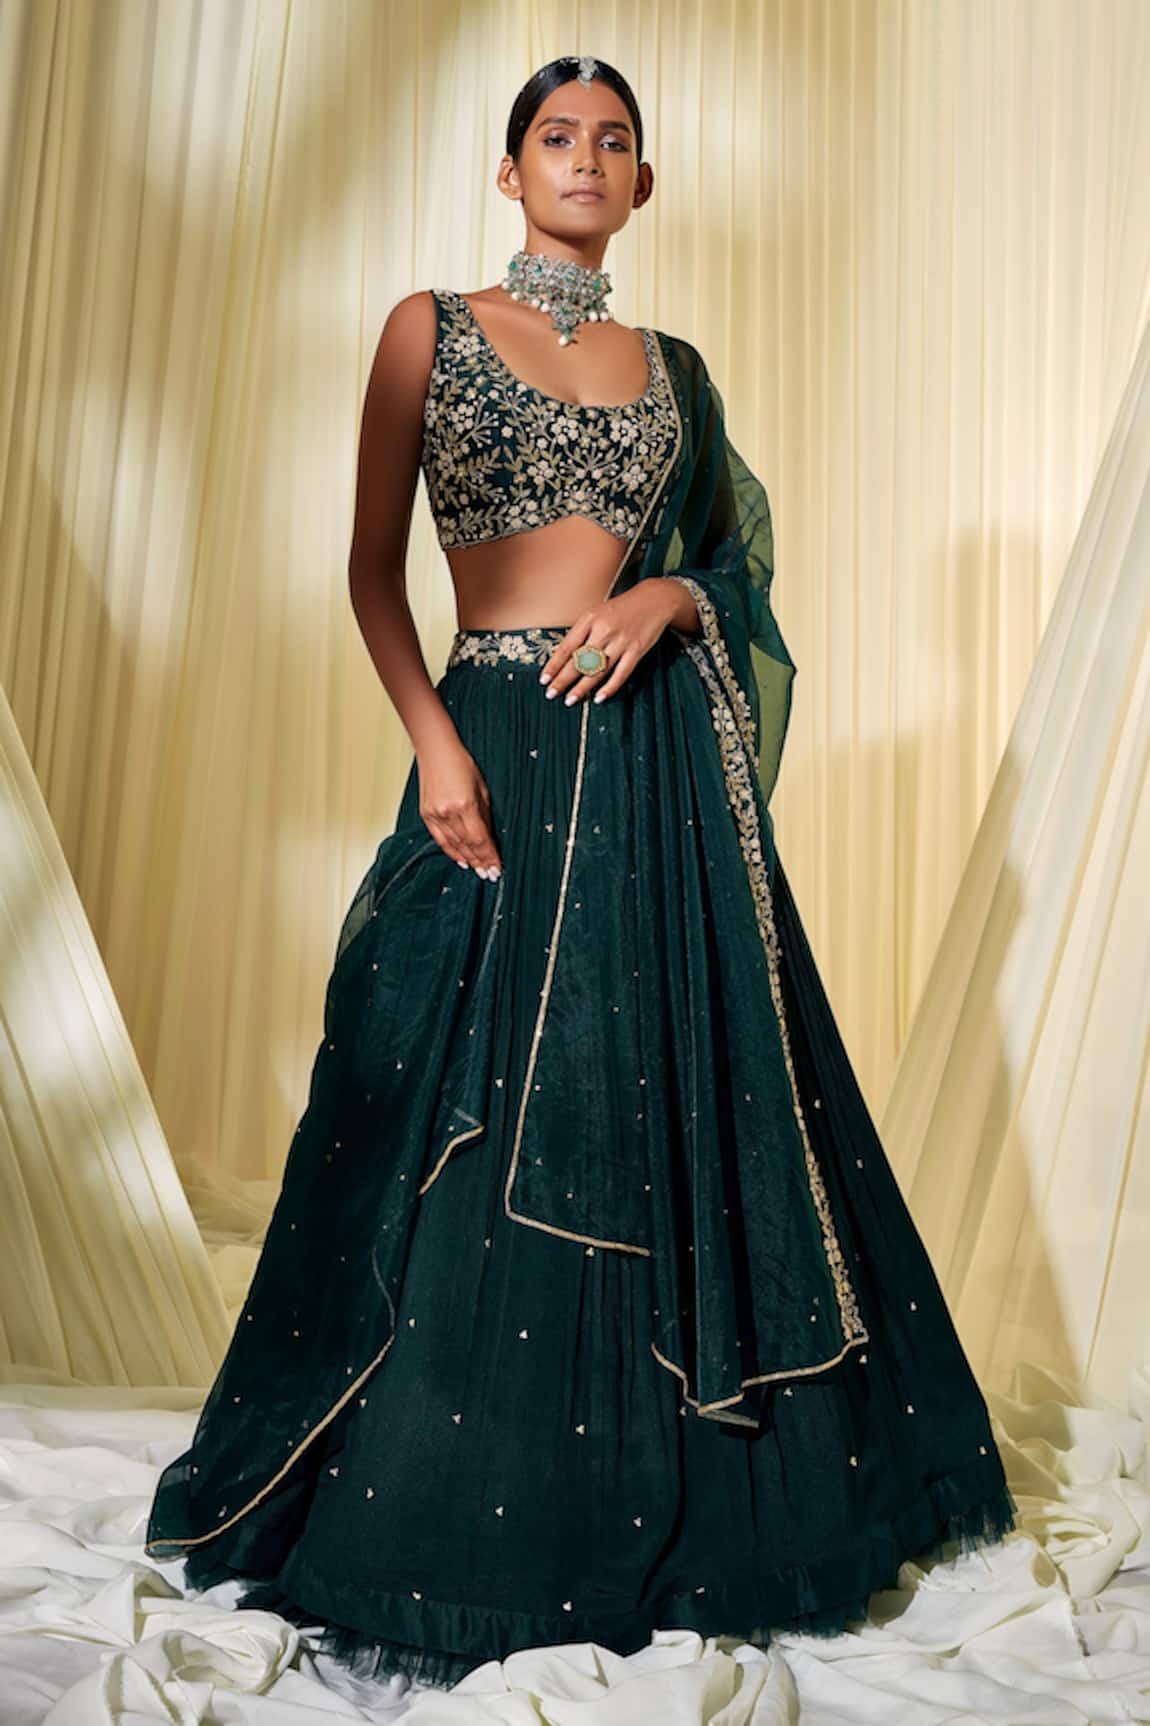 Exquisite & Expensive Lehengas To Win Your Heart If You Don't Want  Sabyasachi! | Kalki Fashion Blog